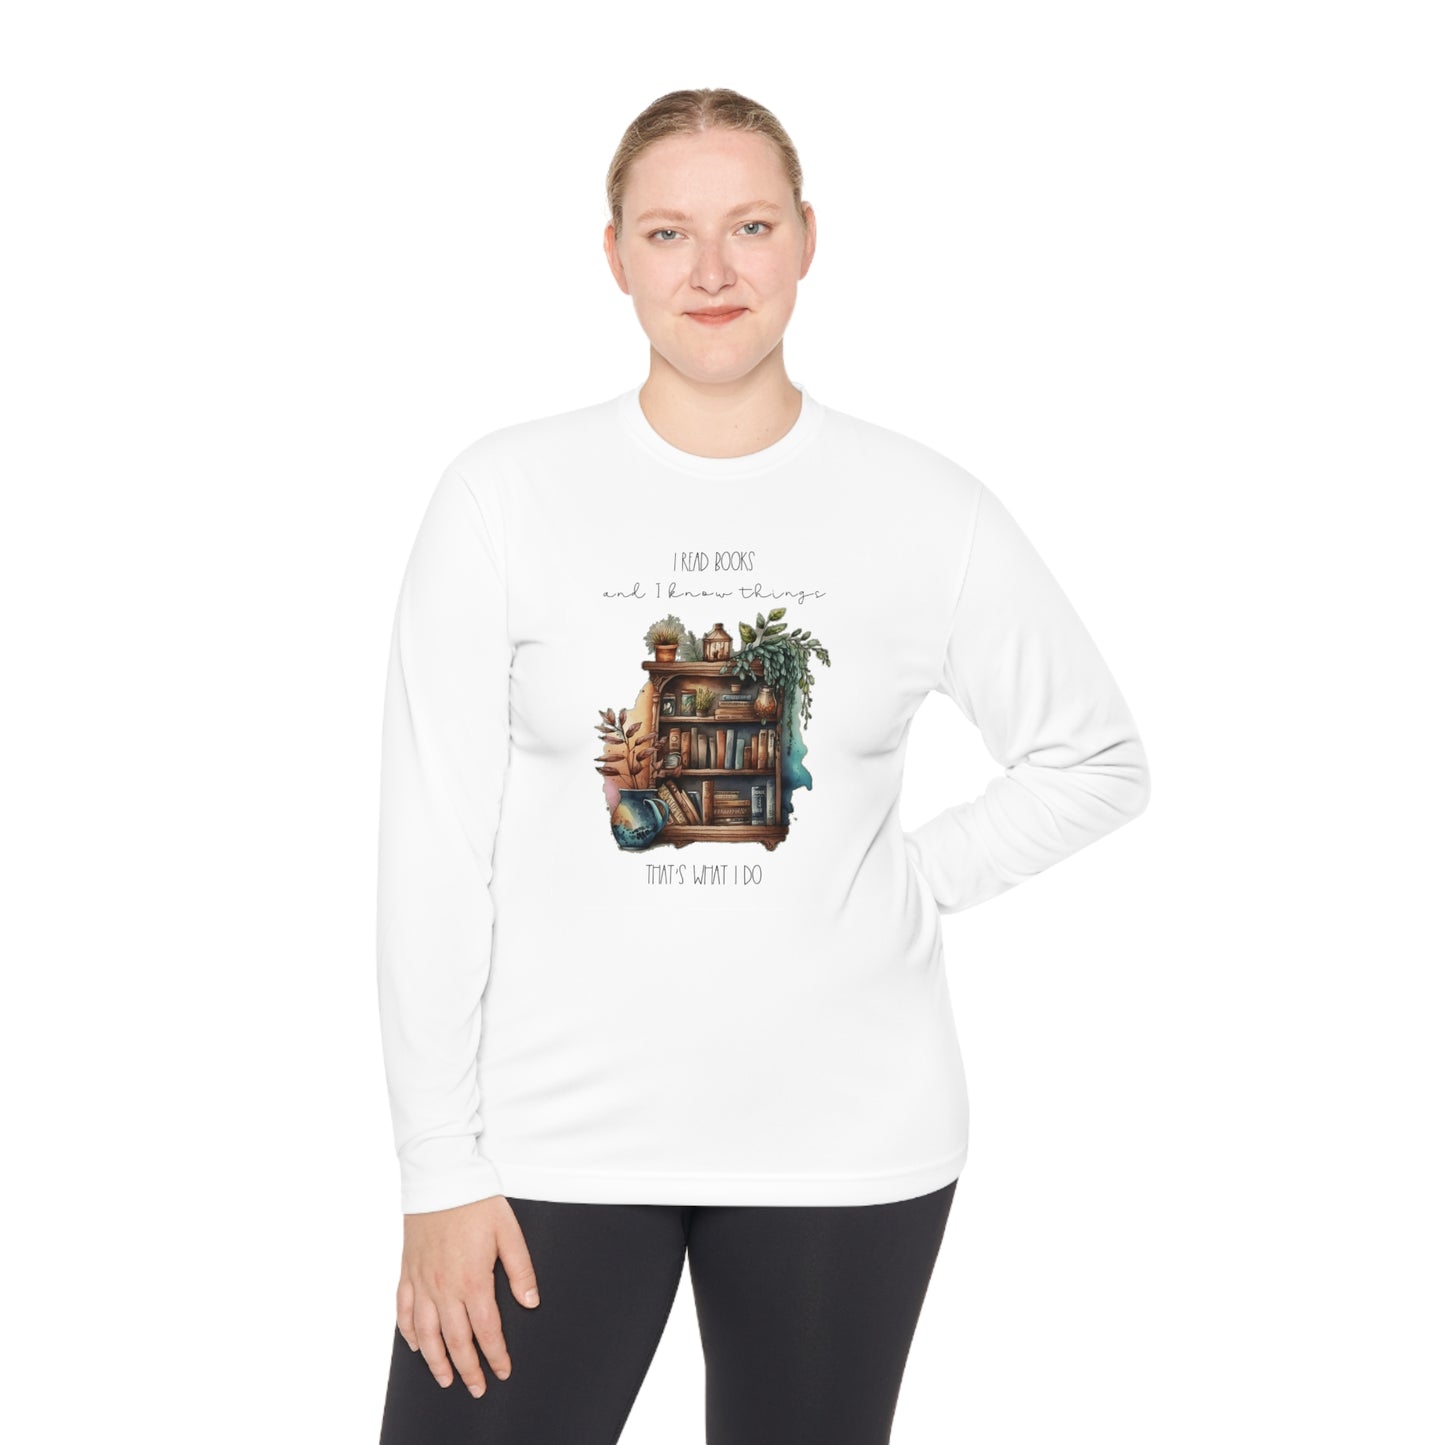 Unisex Lightweight Long Sleeve Tee “I read books and I know things. that’s what I do.”